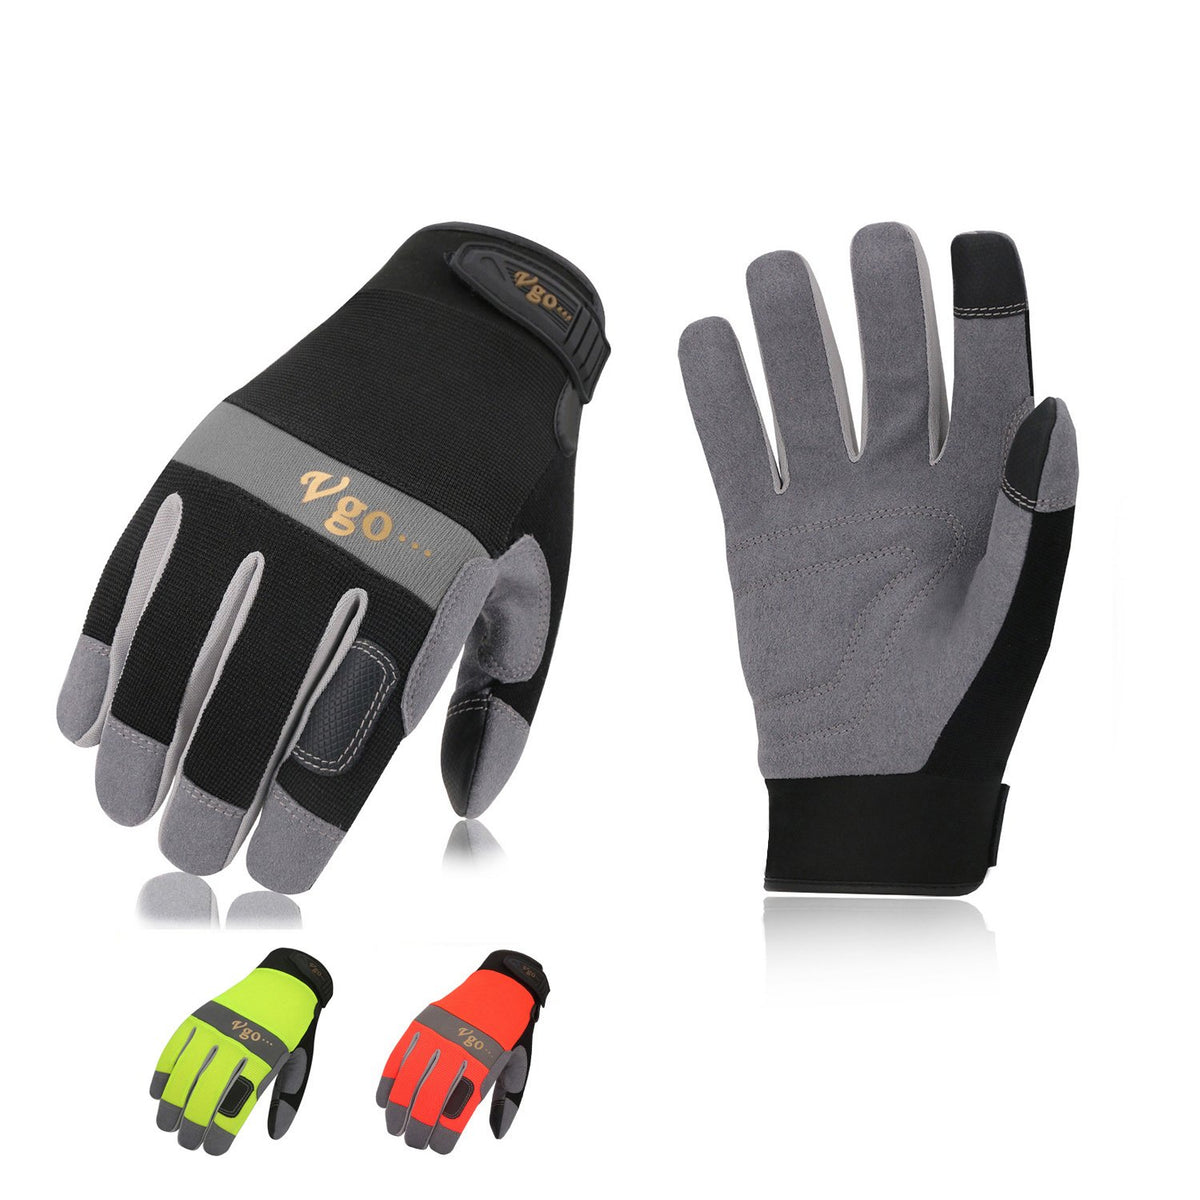 Vgo 1/3Pairs Synthetic Leather Work Gloves for Men, Mechanic